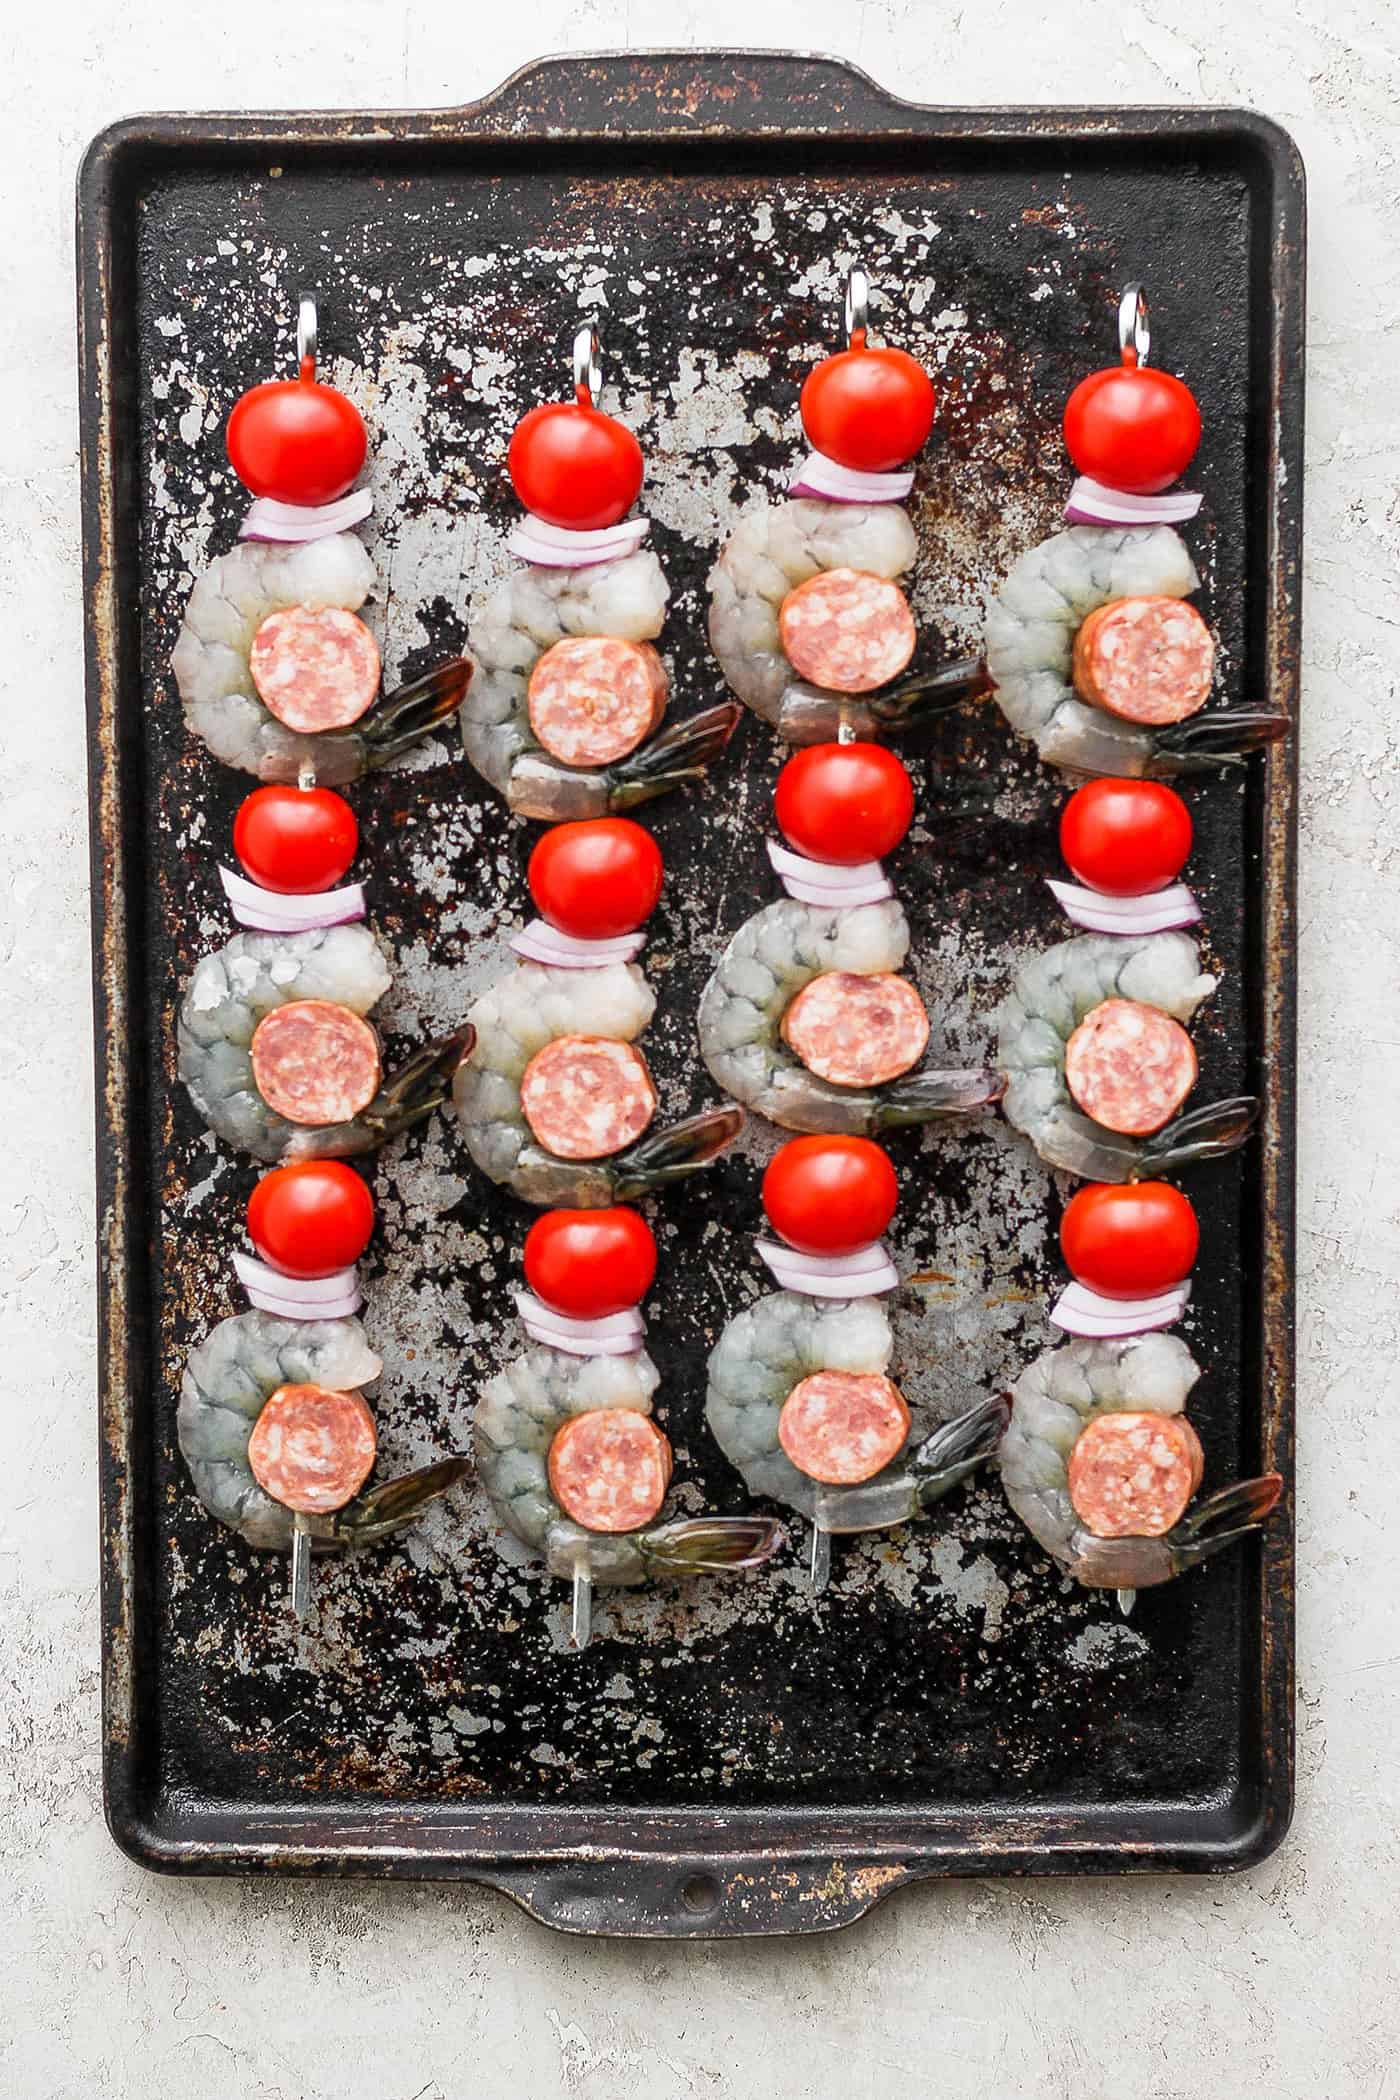 Shrimp and sausage kabobs are shown on a baking tray.